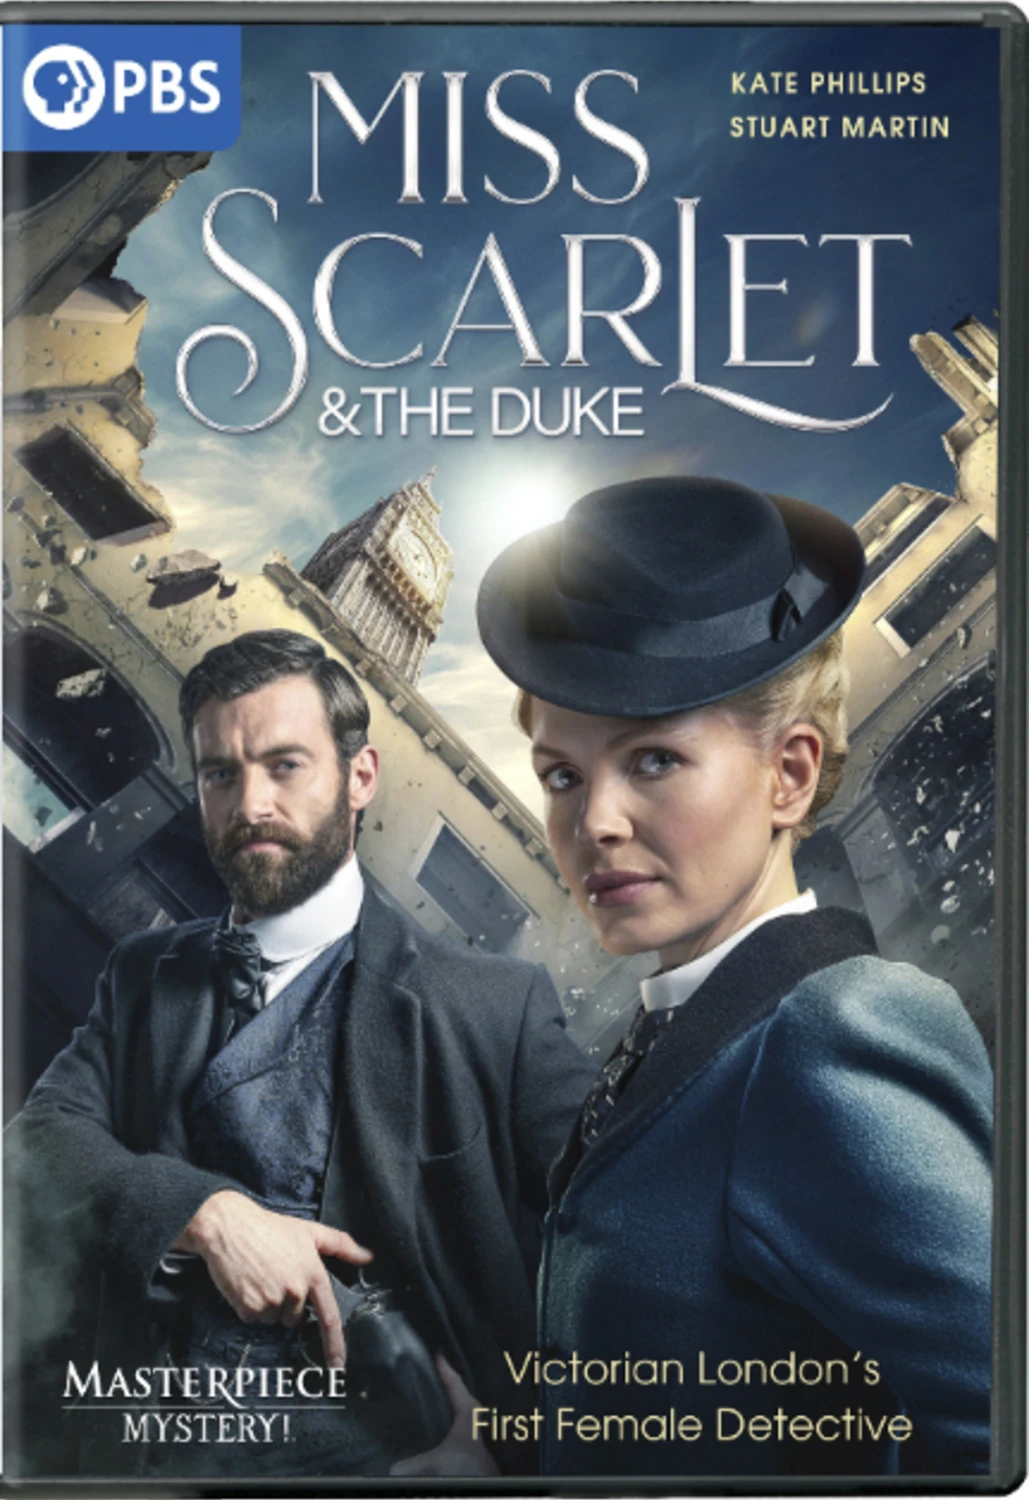 Miss Scarlet and the Duke Season One
(7 day Dvd rental)